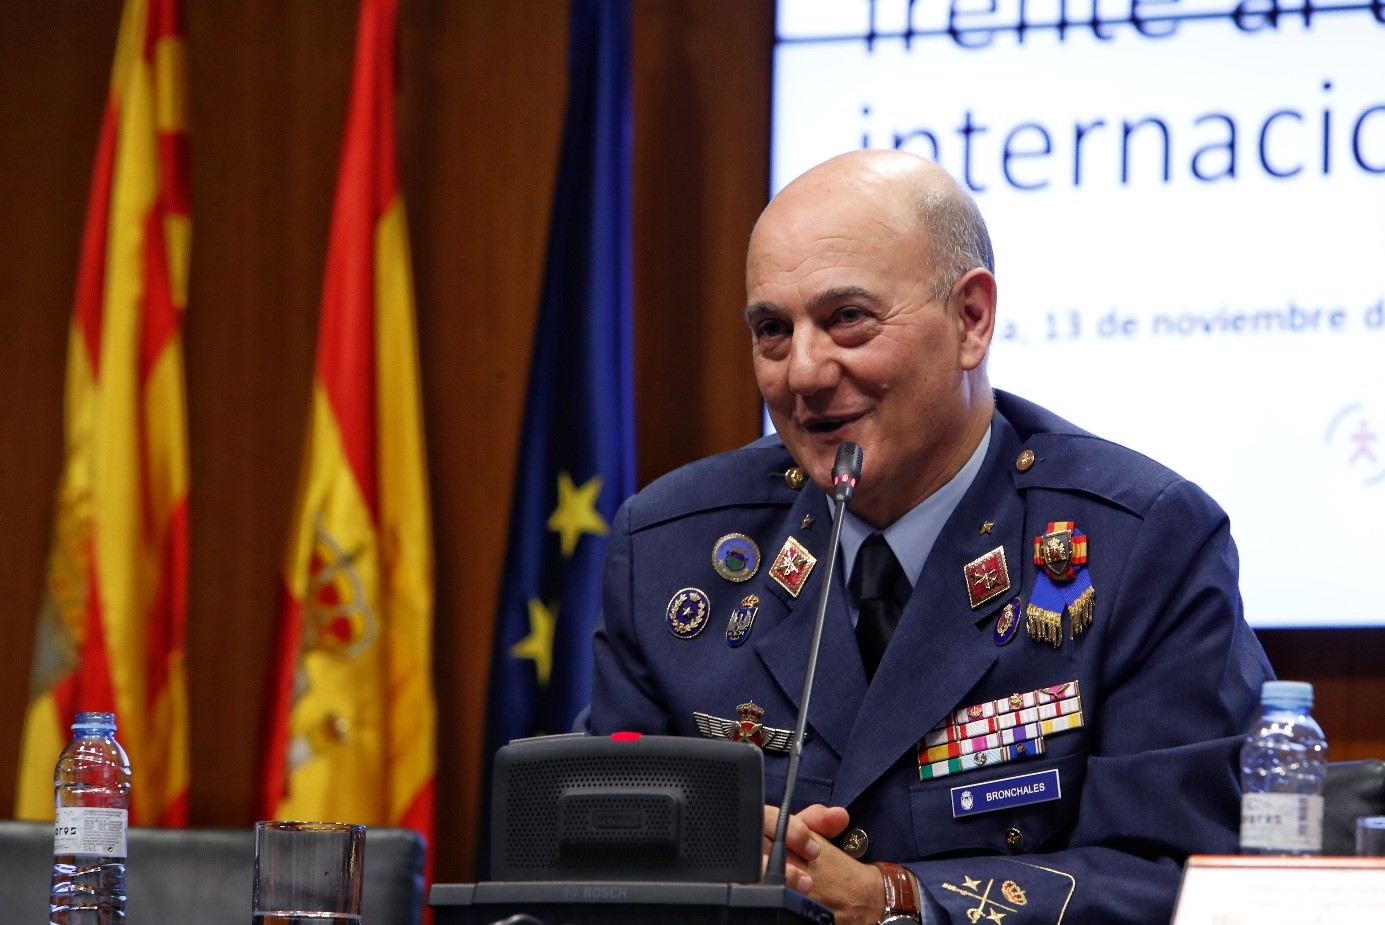 General Muñoz Bronchales gives the inaugural conference at the workshop “The Armed Forces against International Terrorism”